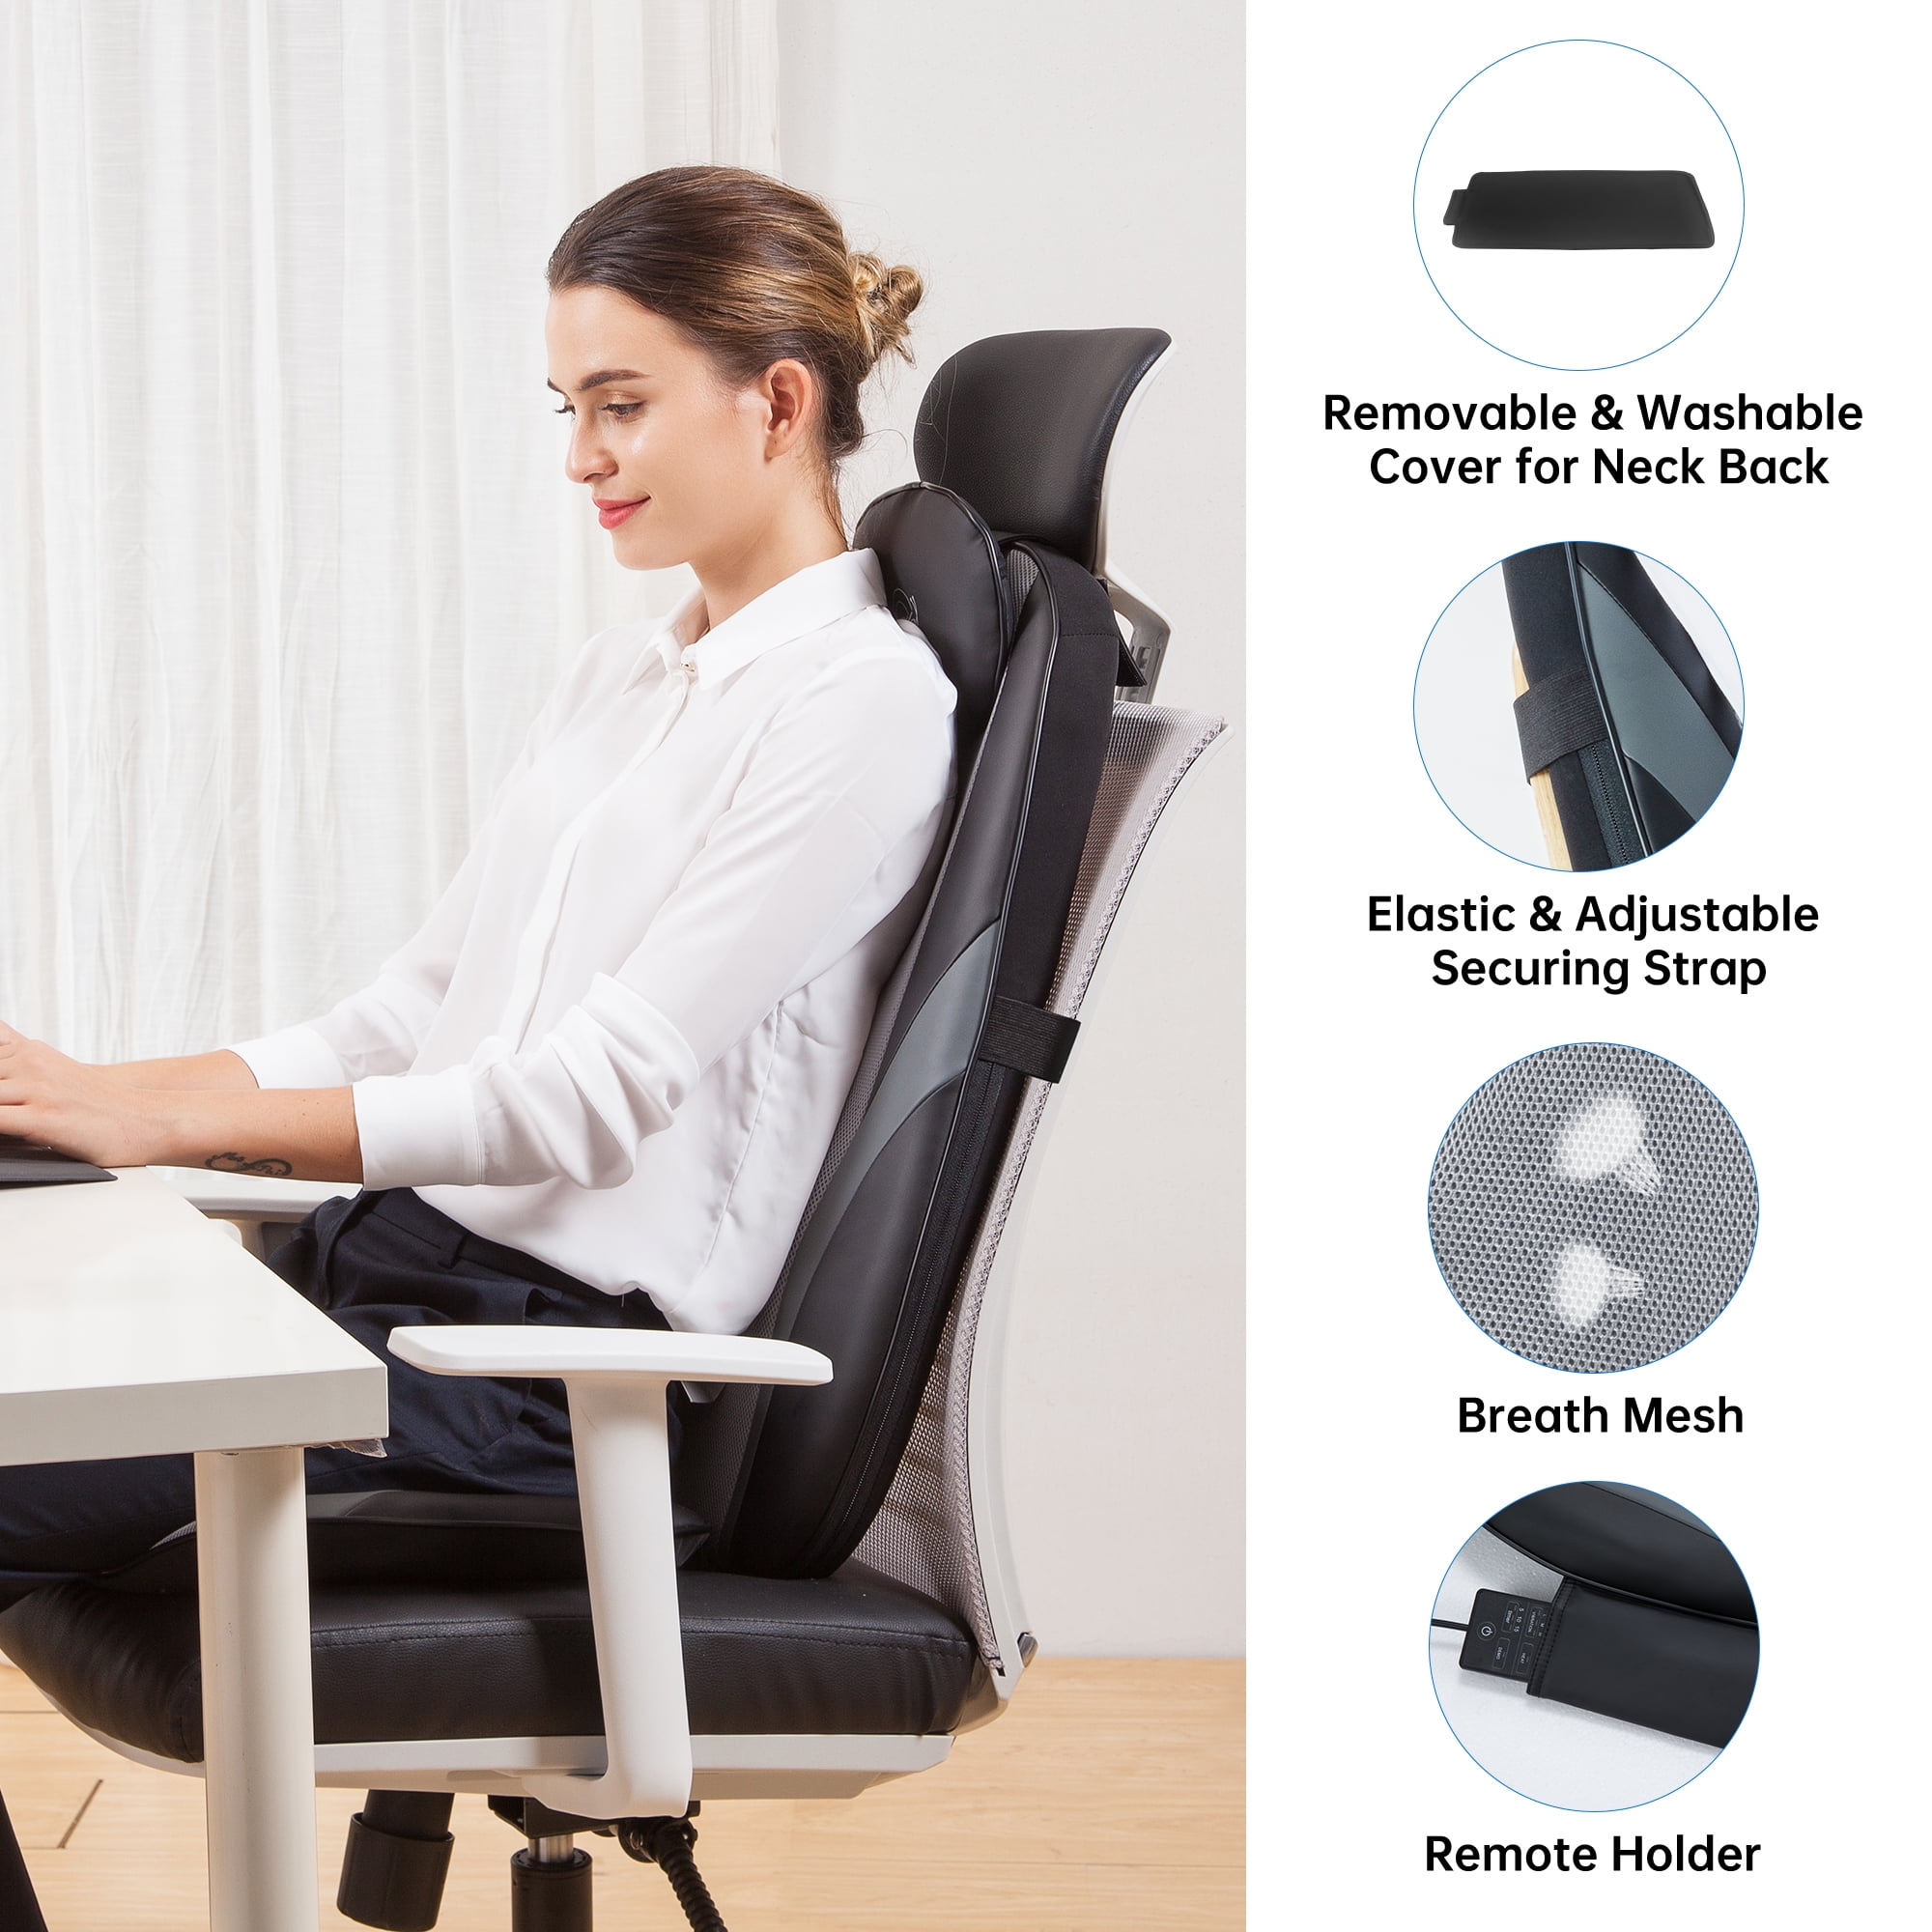 Snailax Back Massager Chair Pad, Motors Massage Seat Cushion with Heat, Extra Memory Foam Support Pad, Size: 18.78 x 13.35 x 8.23, Gray